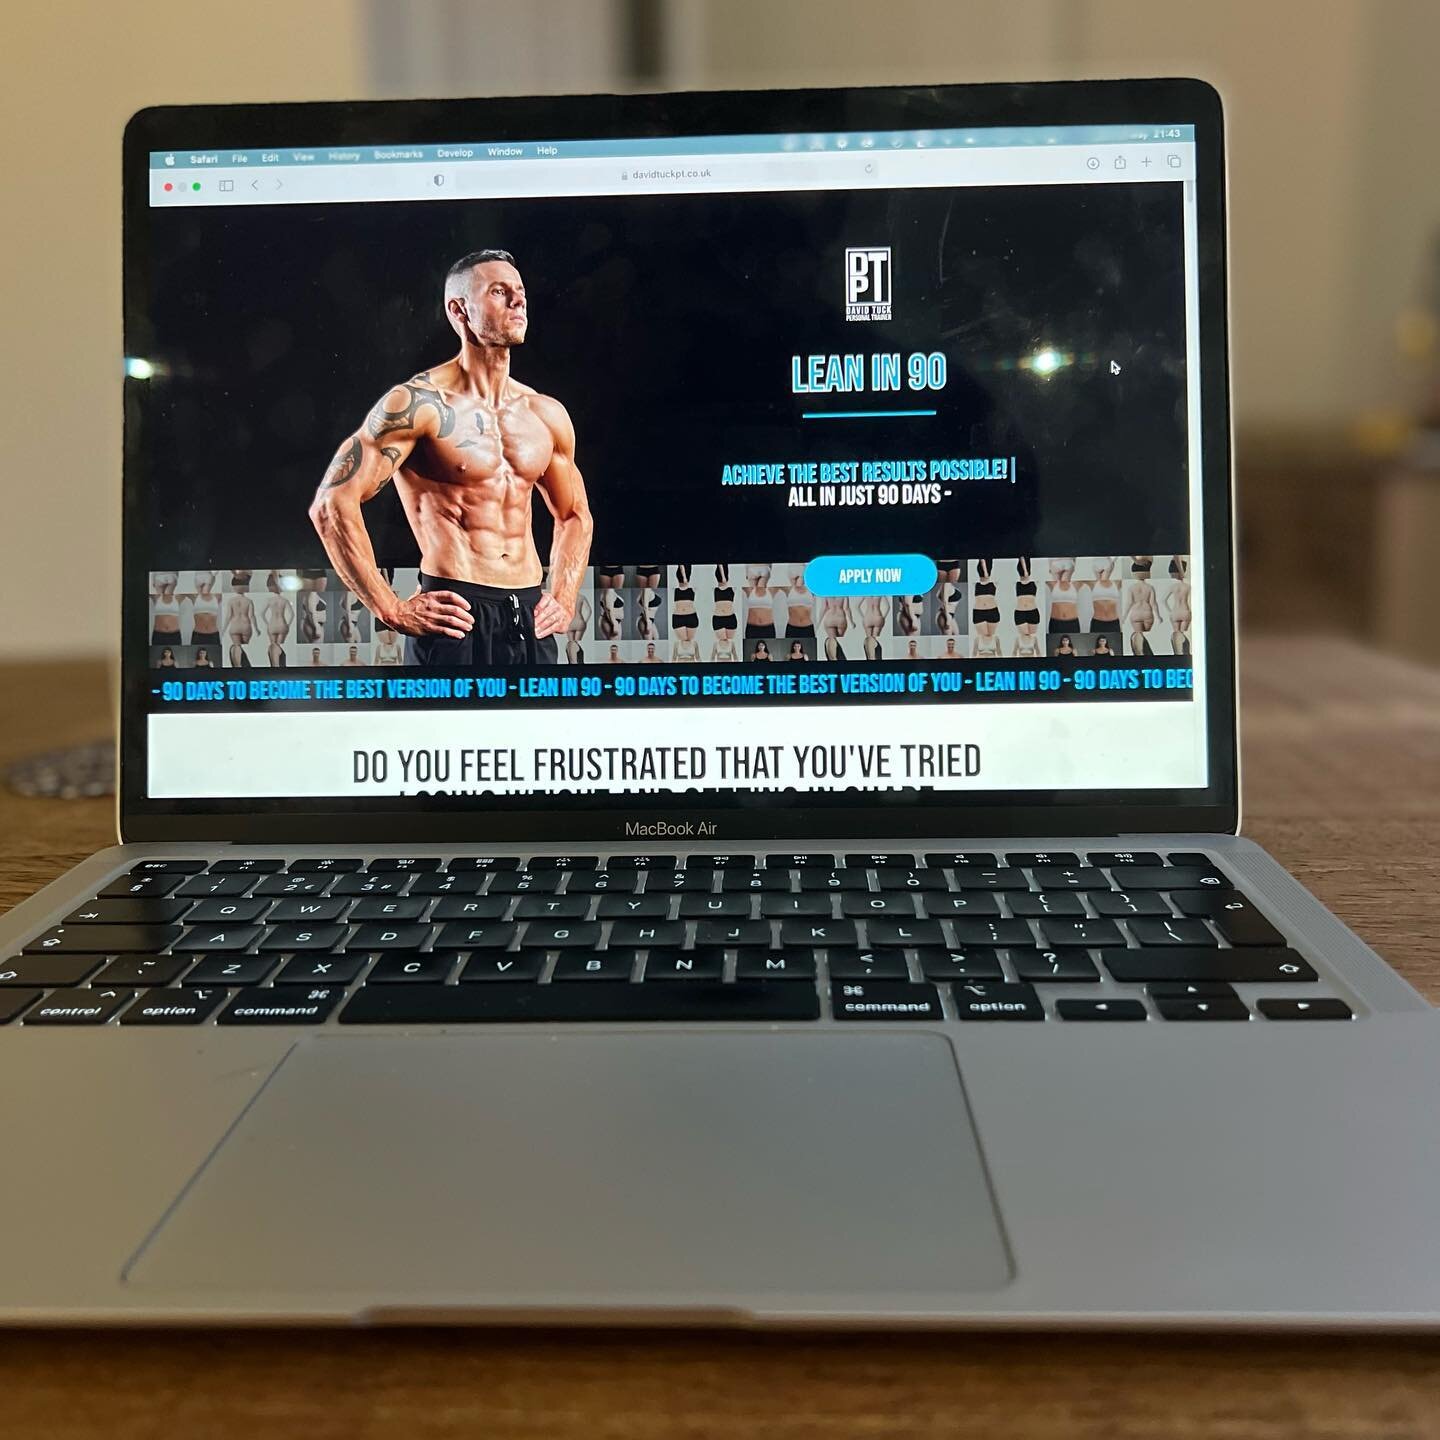 New page live on the site 🤩 

With some of my new pics from the shoot

Even after a busy day of training clients, online check ins and a beast of an upper session in the gym 💪 

It&rsquo;s easy for me to sit down at night and continue trying to imp